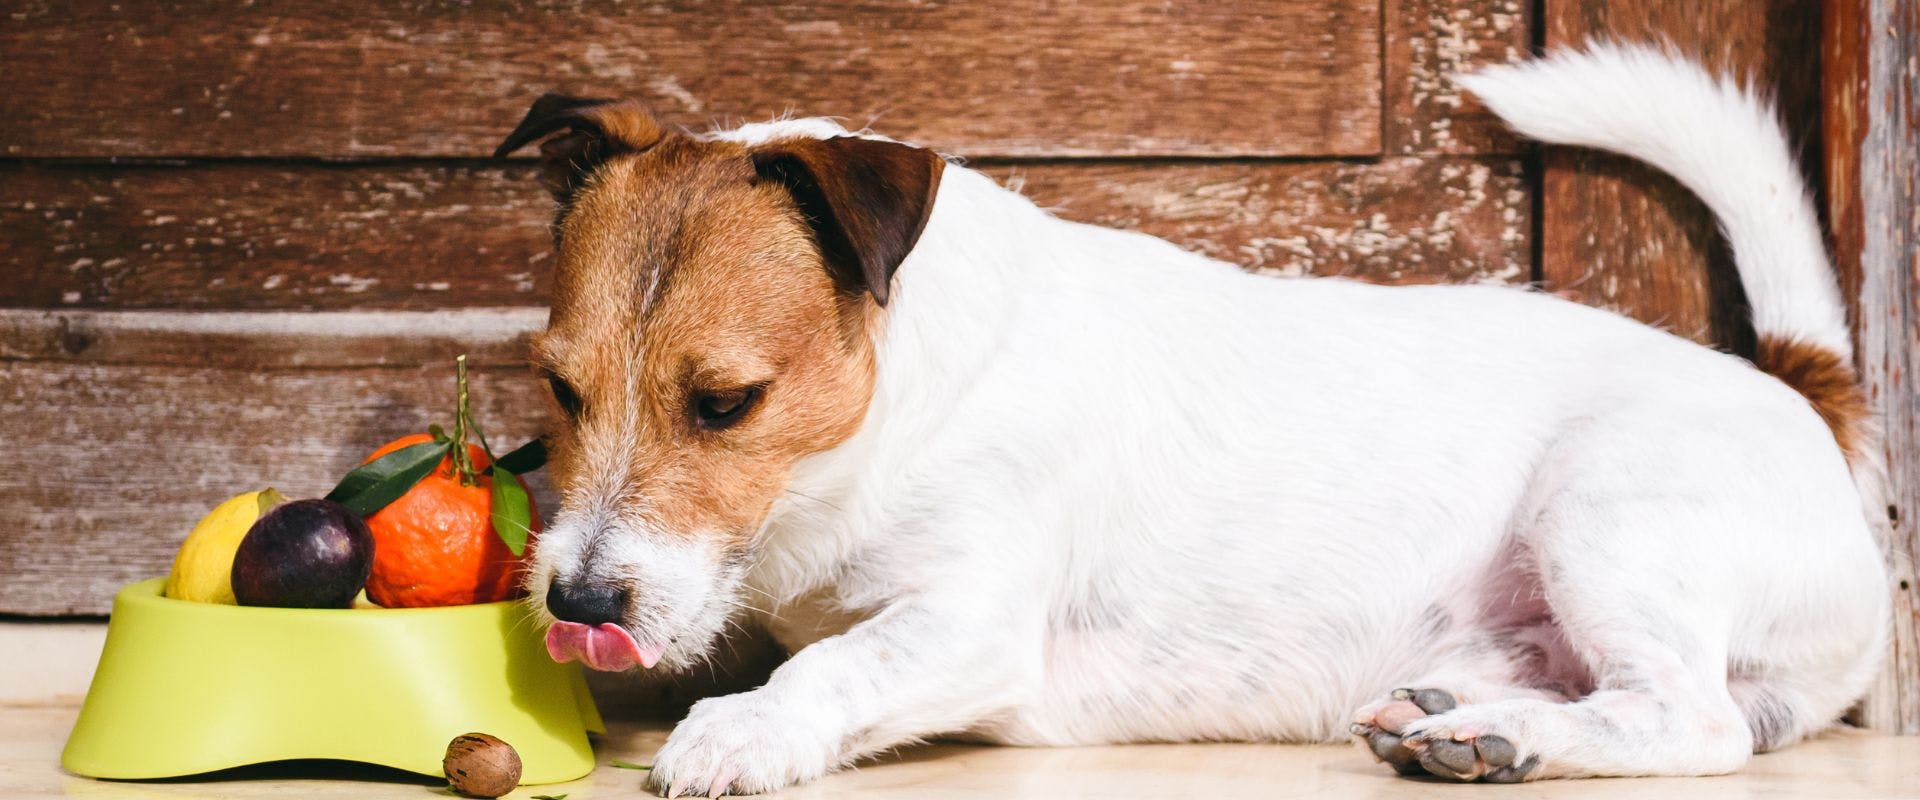 Dog with bowl full of fruits and nuts